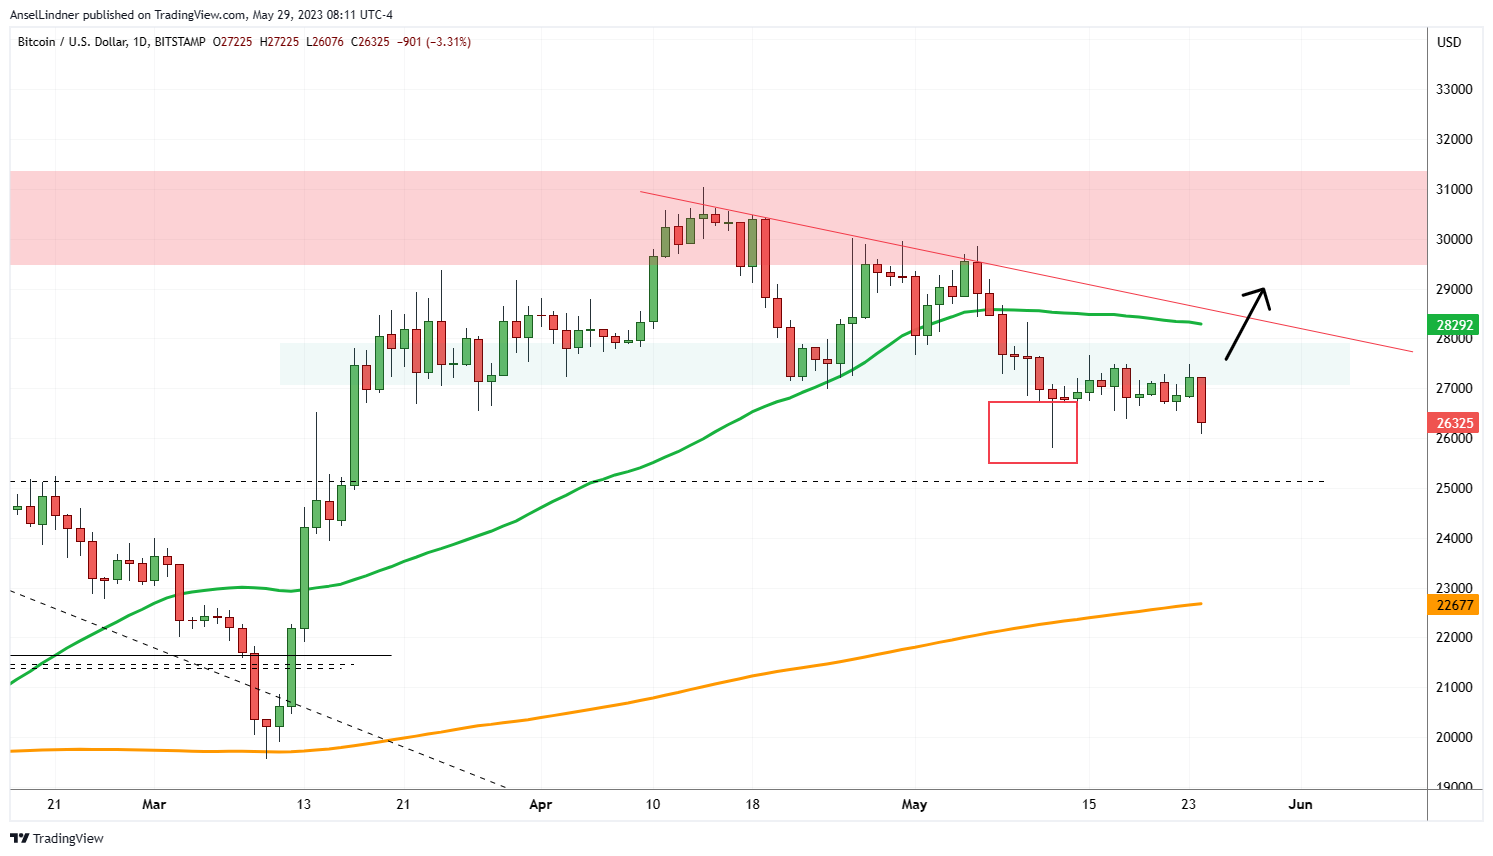 bitcoin daily chart as of recording on 24 May 23